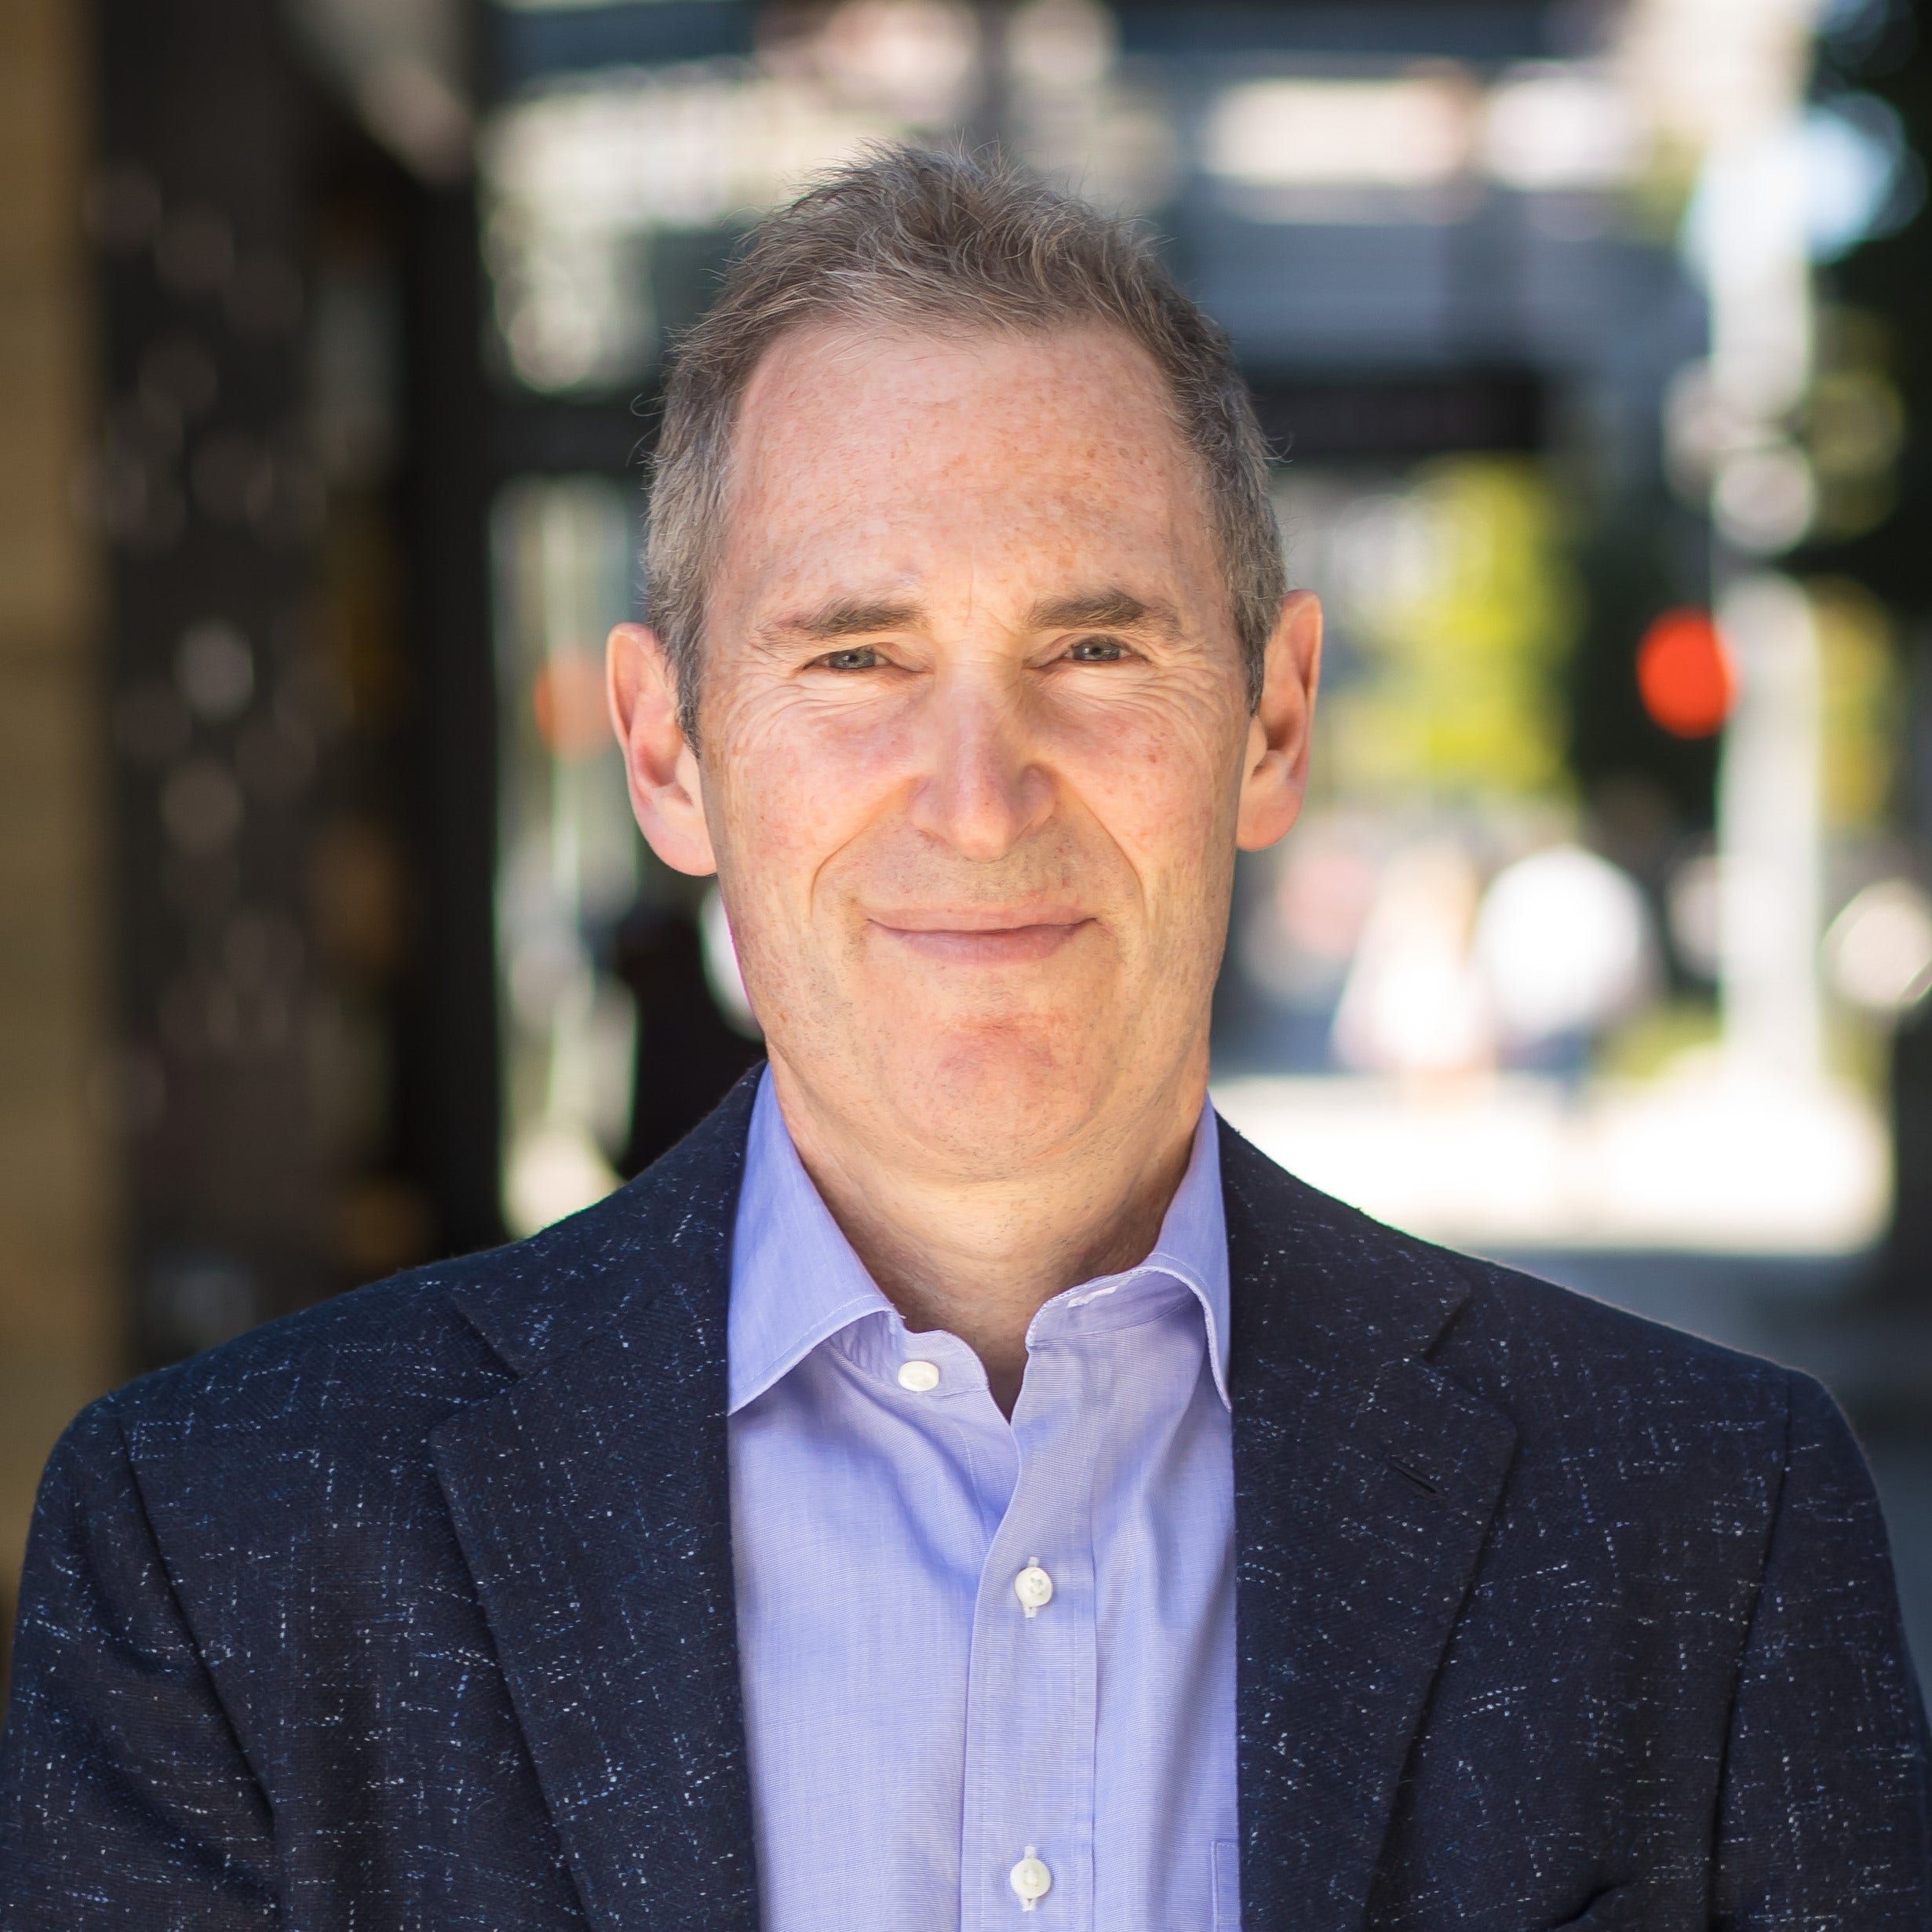 How Much Did Andy Jassy Make In His First Year As Amazon CEO?